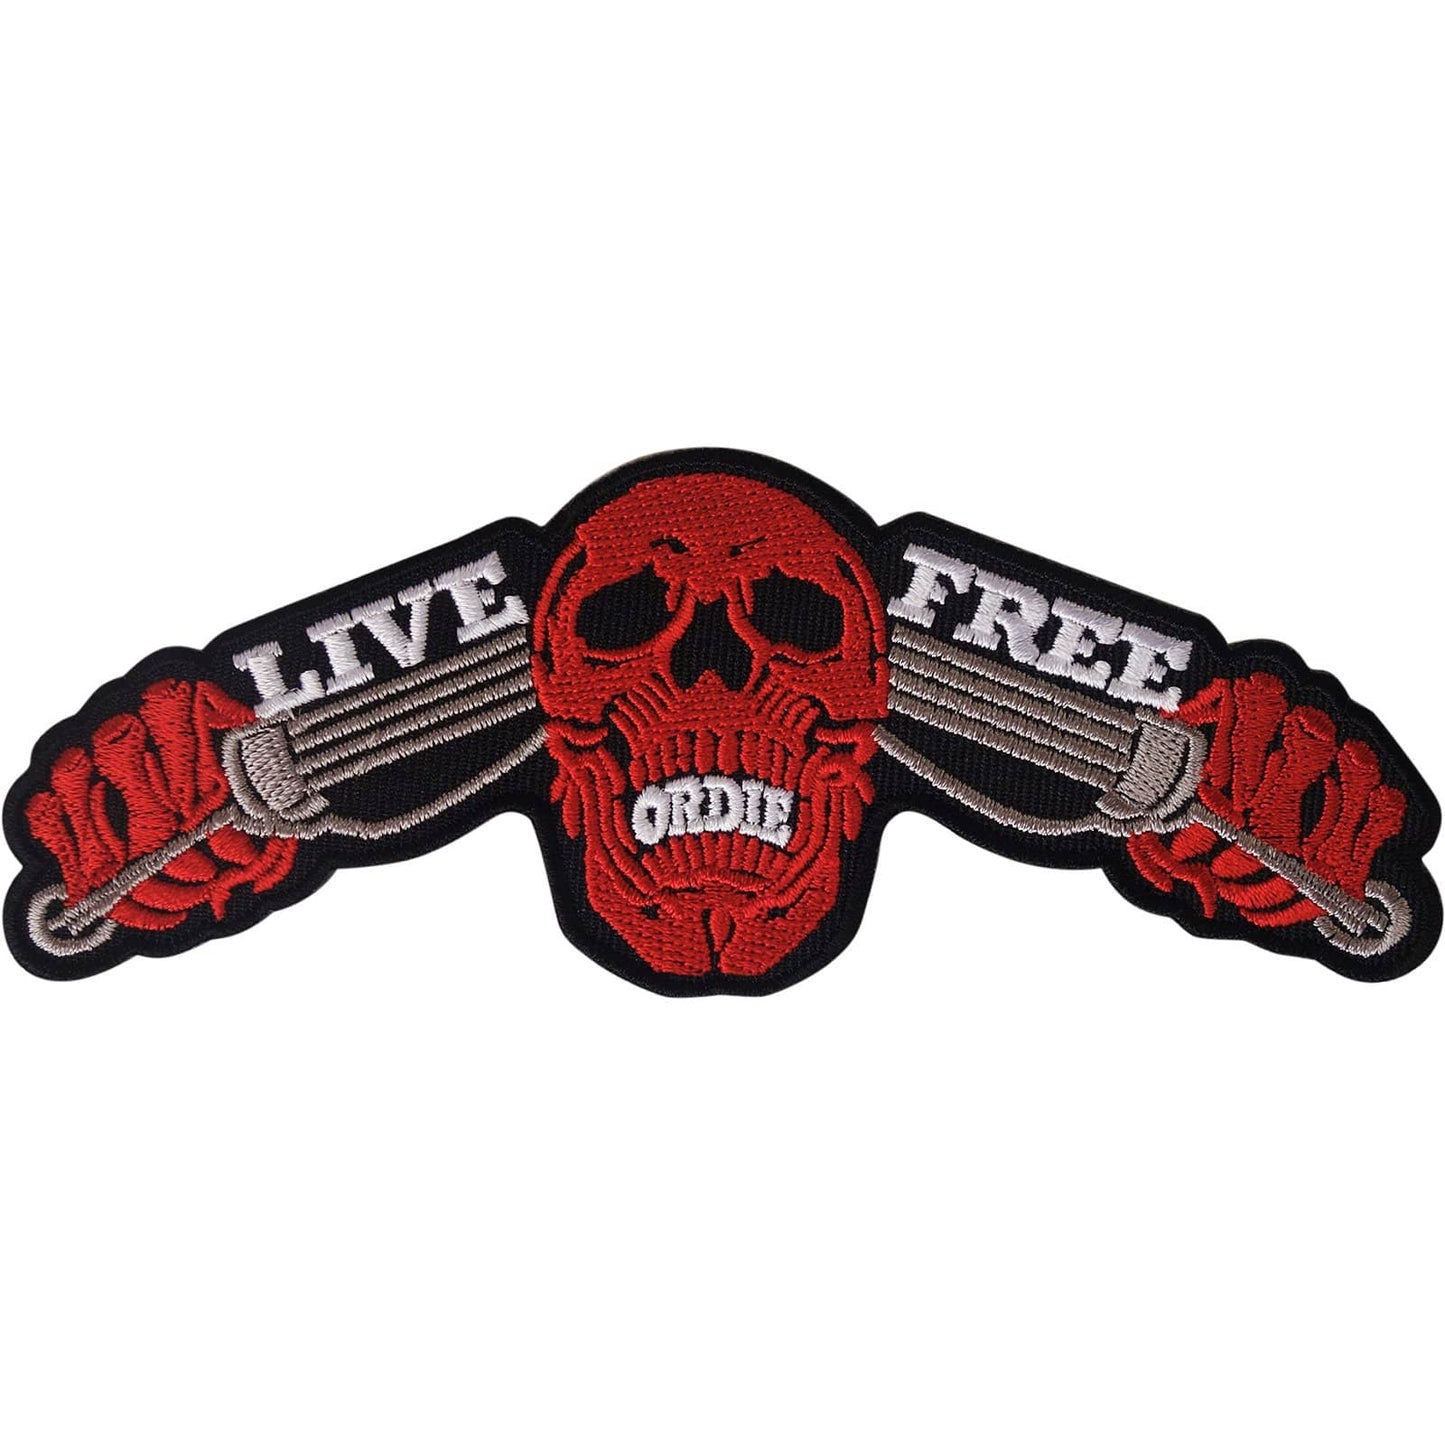 Motorcycle Jacket Patch Iron On Sew On Chopper Motorbike Skull Embroidered Badge